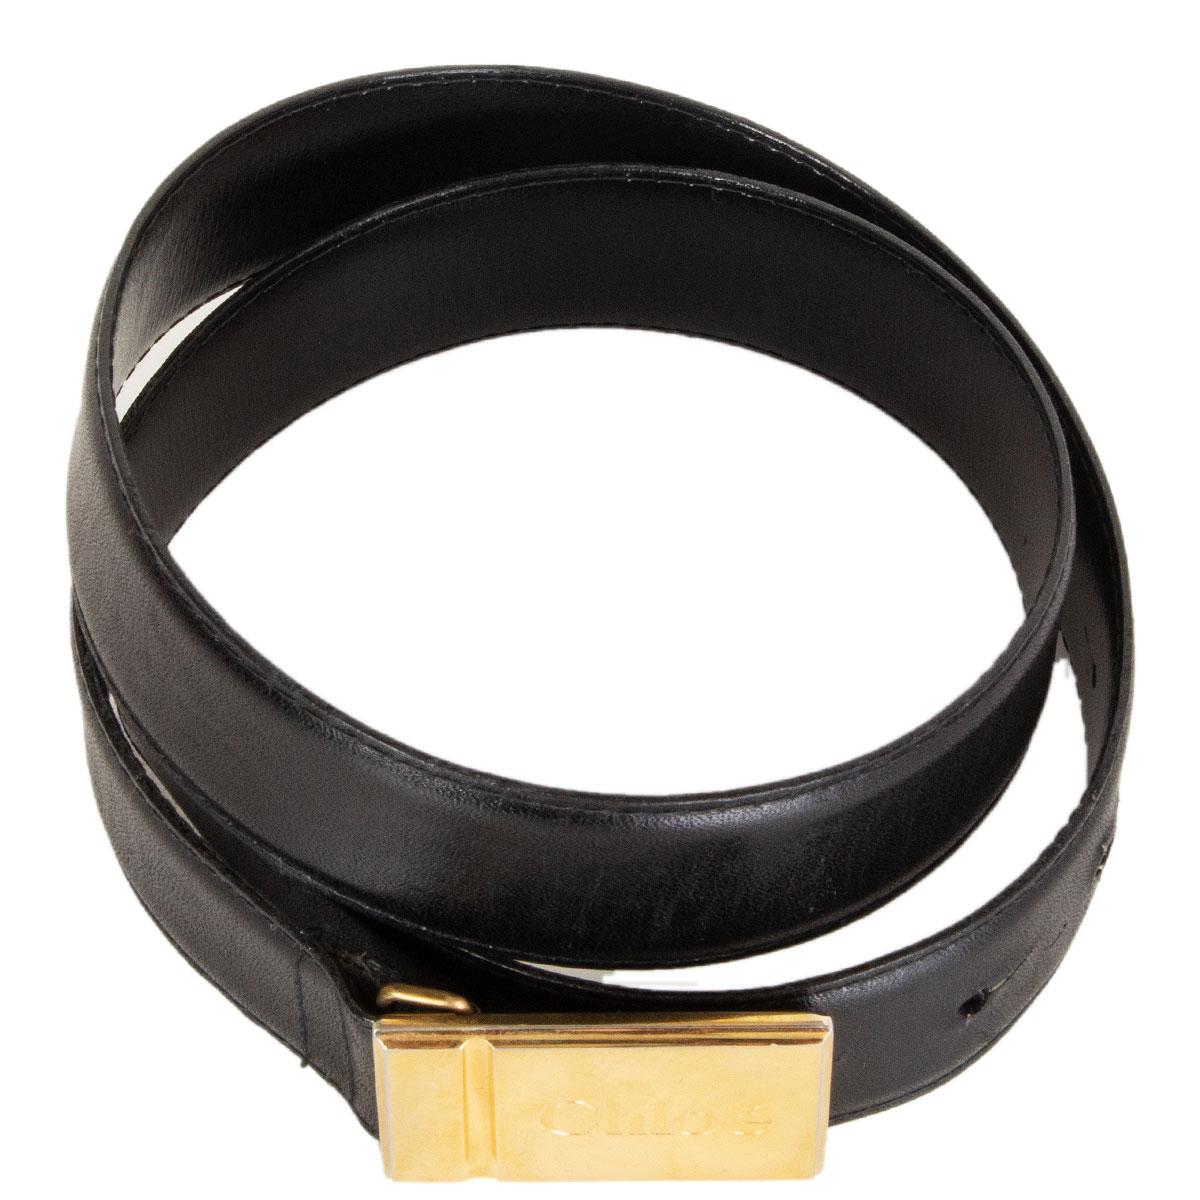 100% authentic Chloé black leather belt with gold-tone logo embossed buckle. Has been worn with some scratches on the buckle. Overall in very good condition. 

Tag Size 70
Width 2.8cm (1.1in)
Fits 64.5cm (25.2in) to 74.5cm (29.1in)
Length 85cm